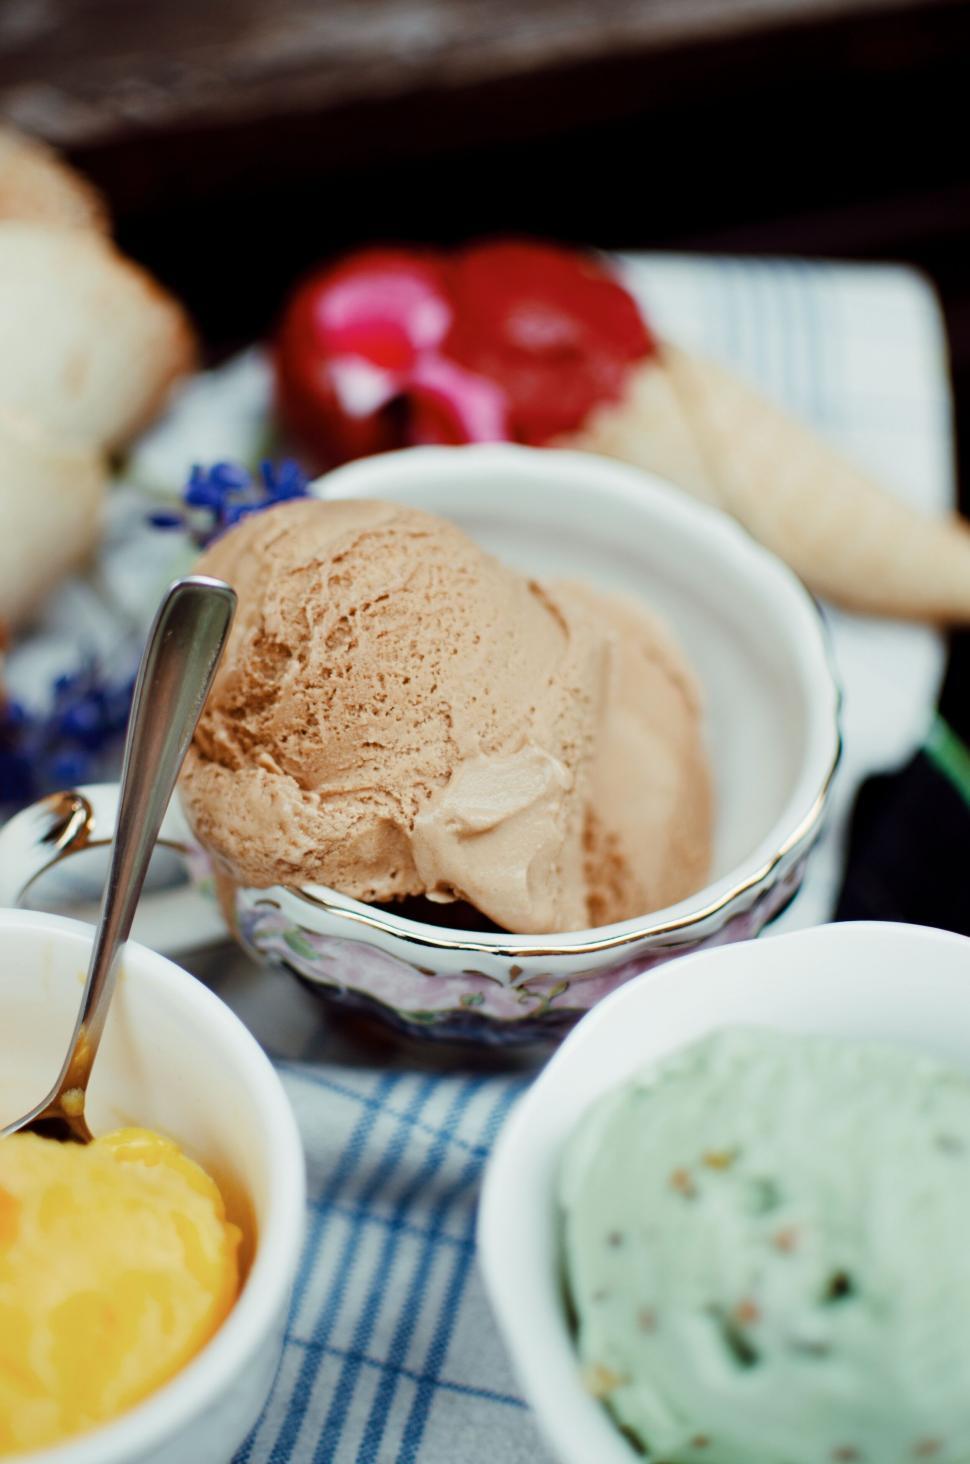 Free Image of A bowl of ice cream with spoons 